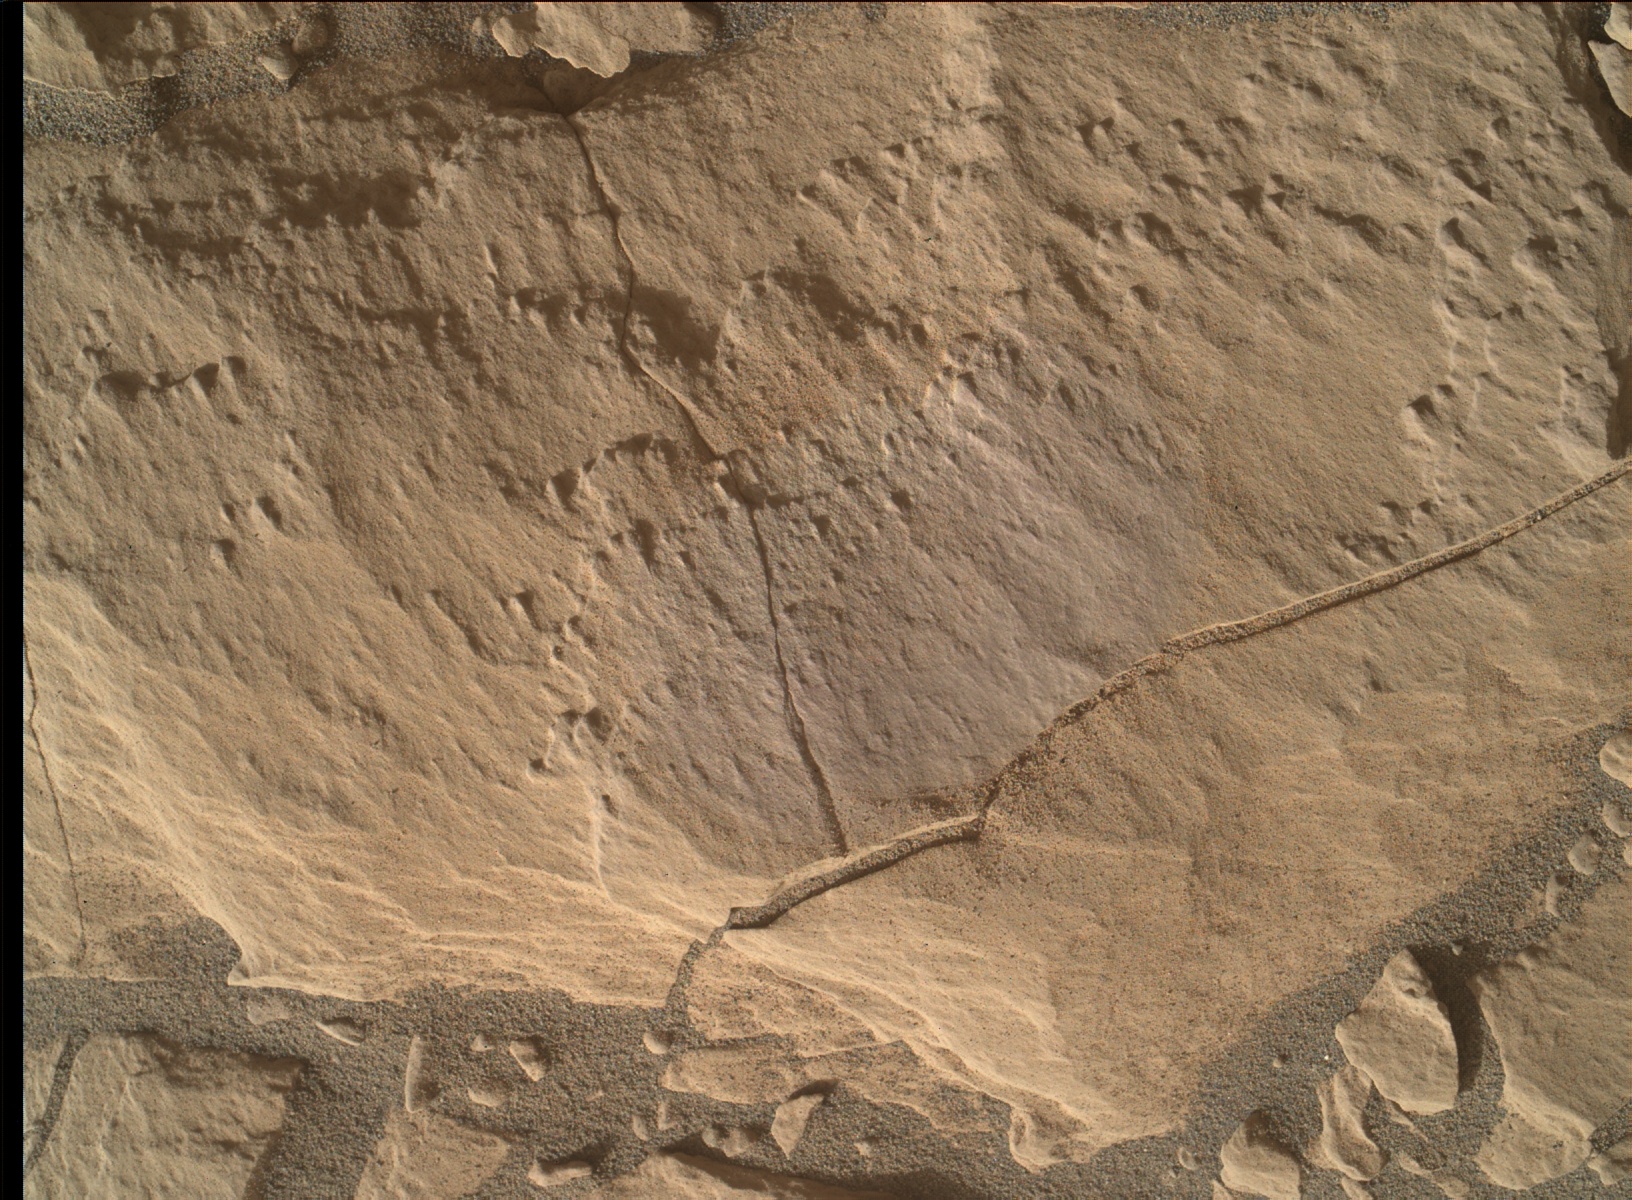 Nasa's Mars rover Curiosity acquired this image using its Mars Hand Lens Imager (MAHLI) on Sol 1824